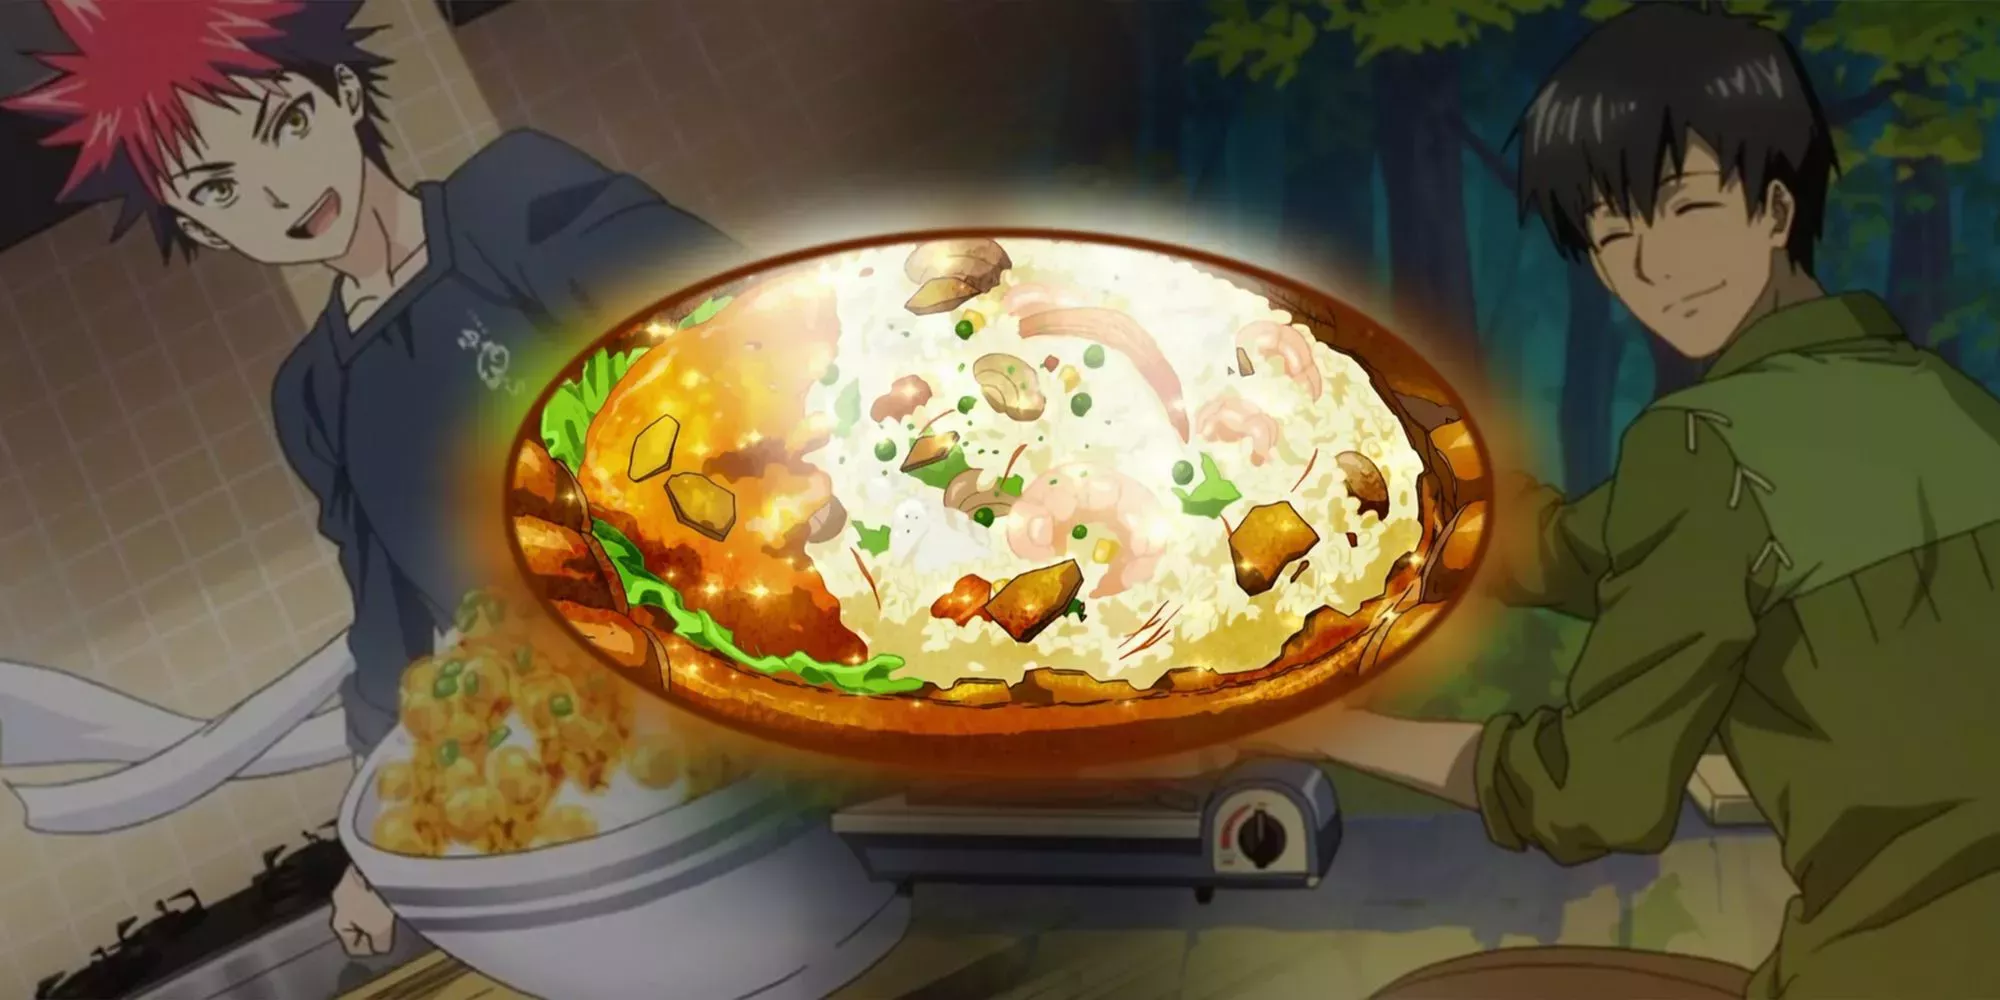 Custom image of Snap from Food Wars and Tsuyoshi from Campfire Cooking in Another World.